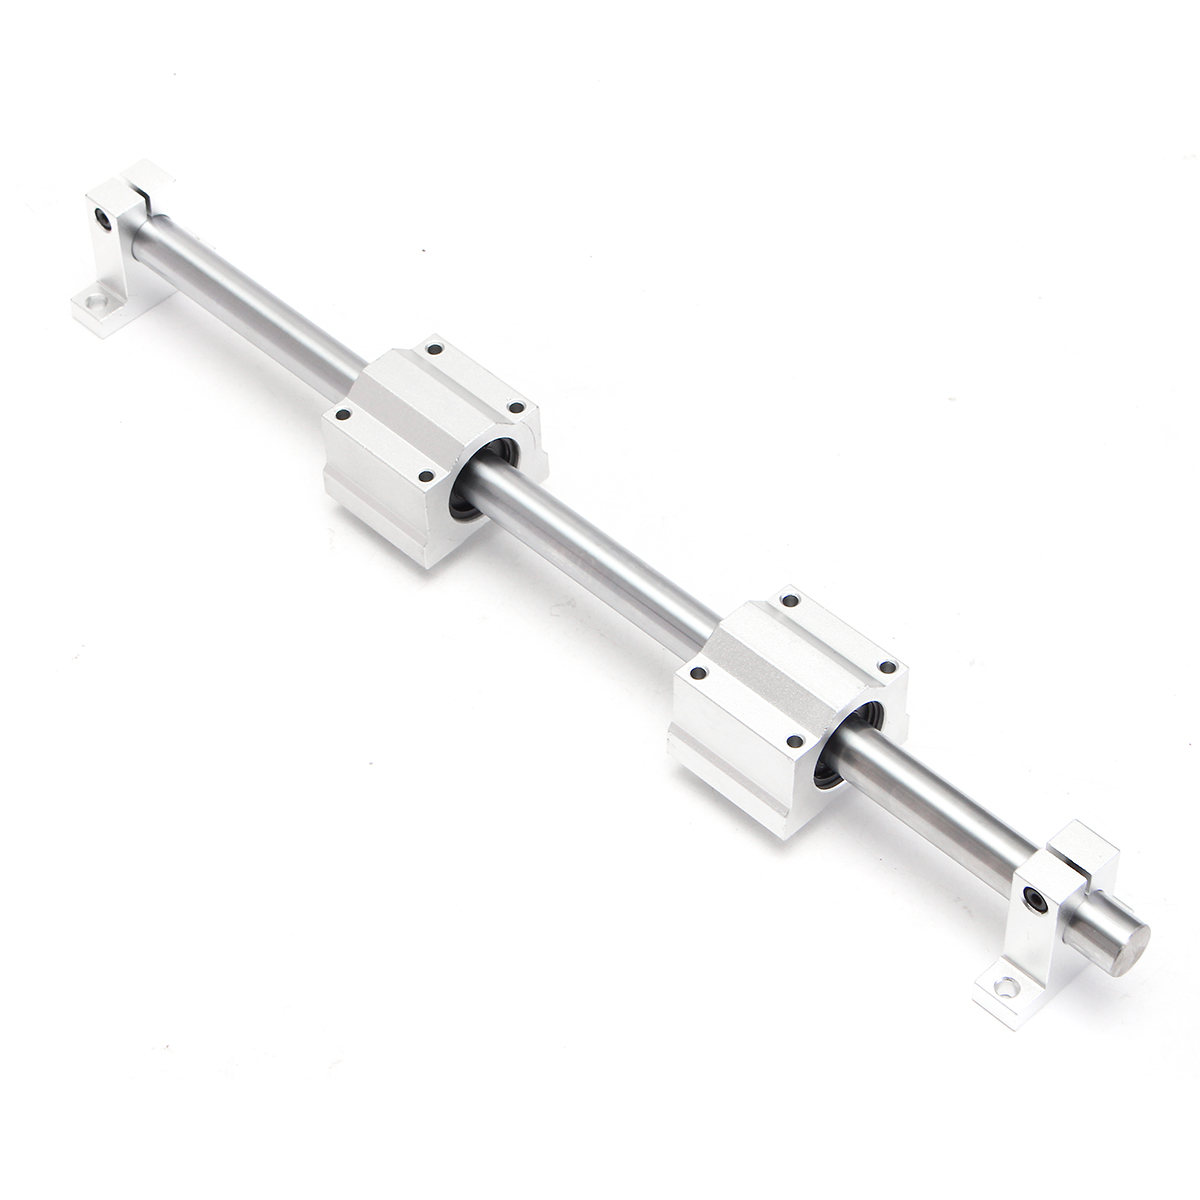 Machifit-16mm-x-1000mm-Linear-Rail-Shaft-With-Bearing-Block-and-Guide-Support-For-CNC-Parts-1390357-8